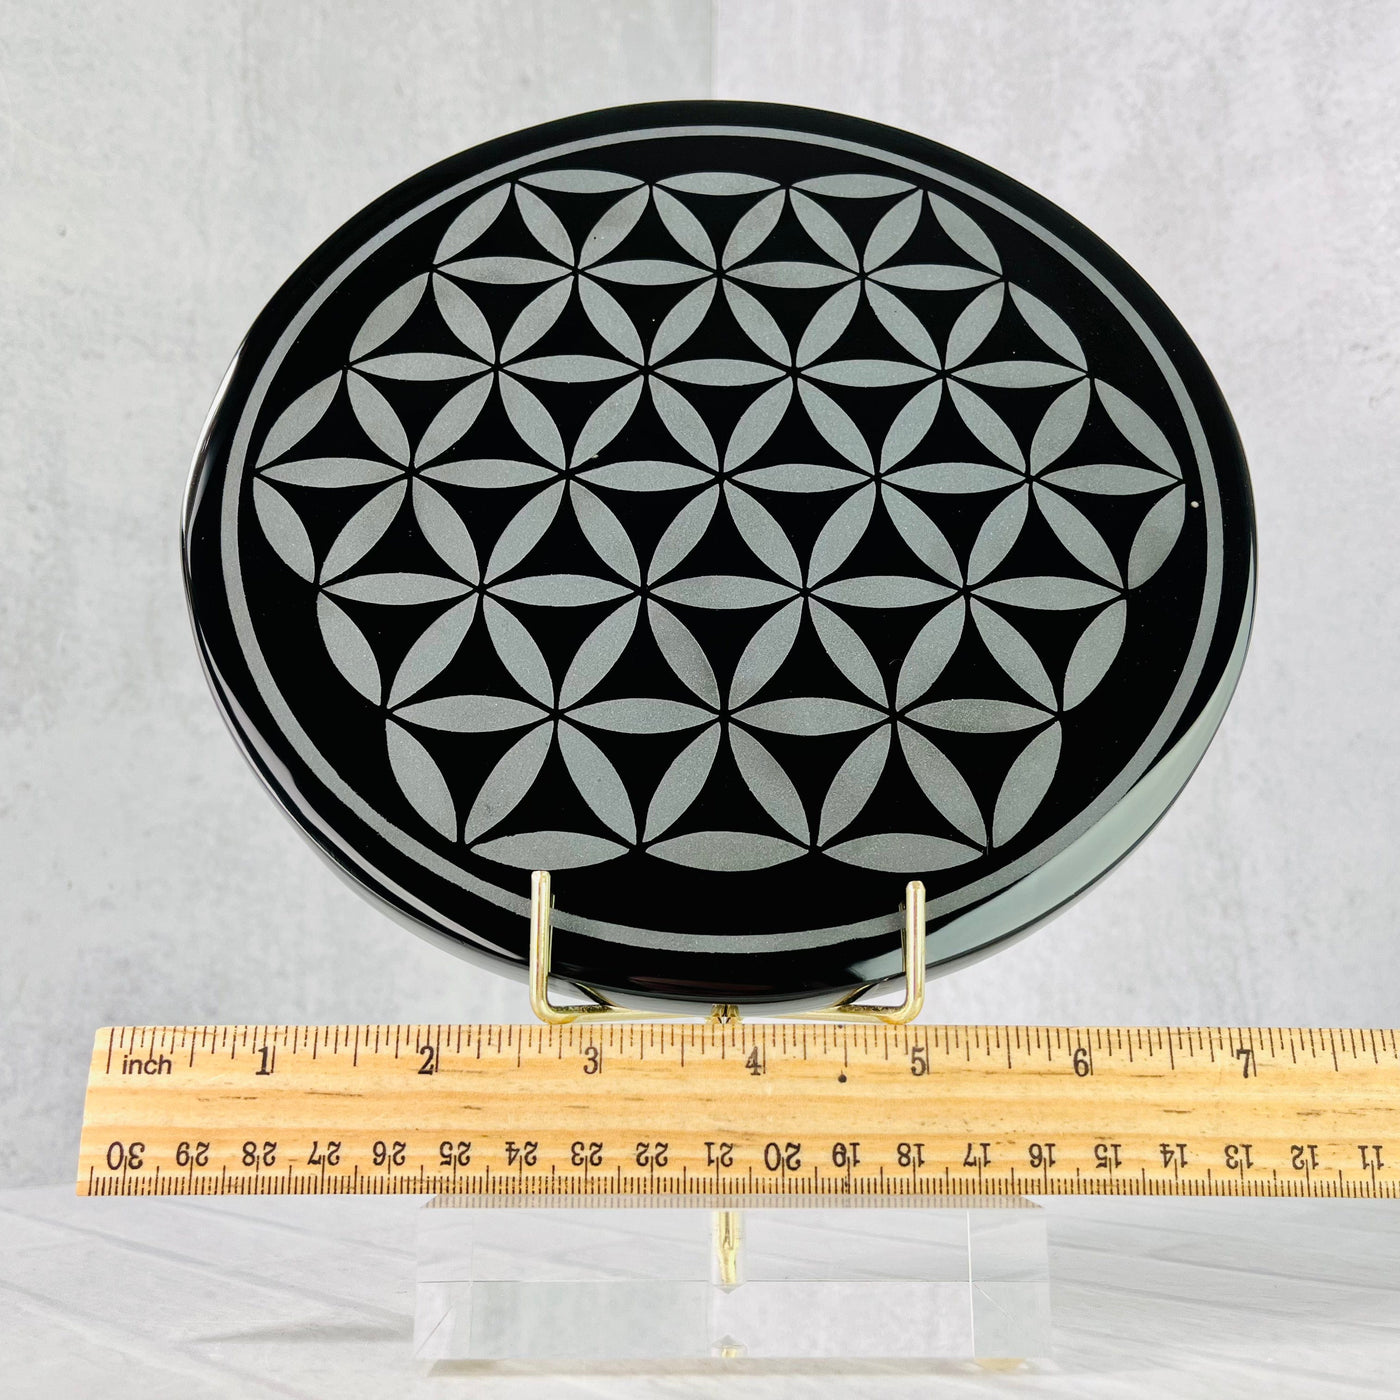 Frontal view of Black Obsidian Flower of Life Plate on a stand, with a ruler placed below it for size reference.